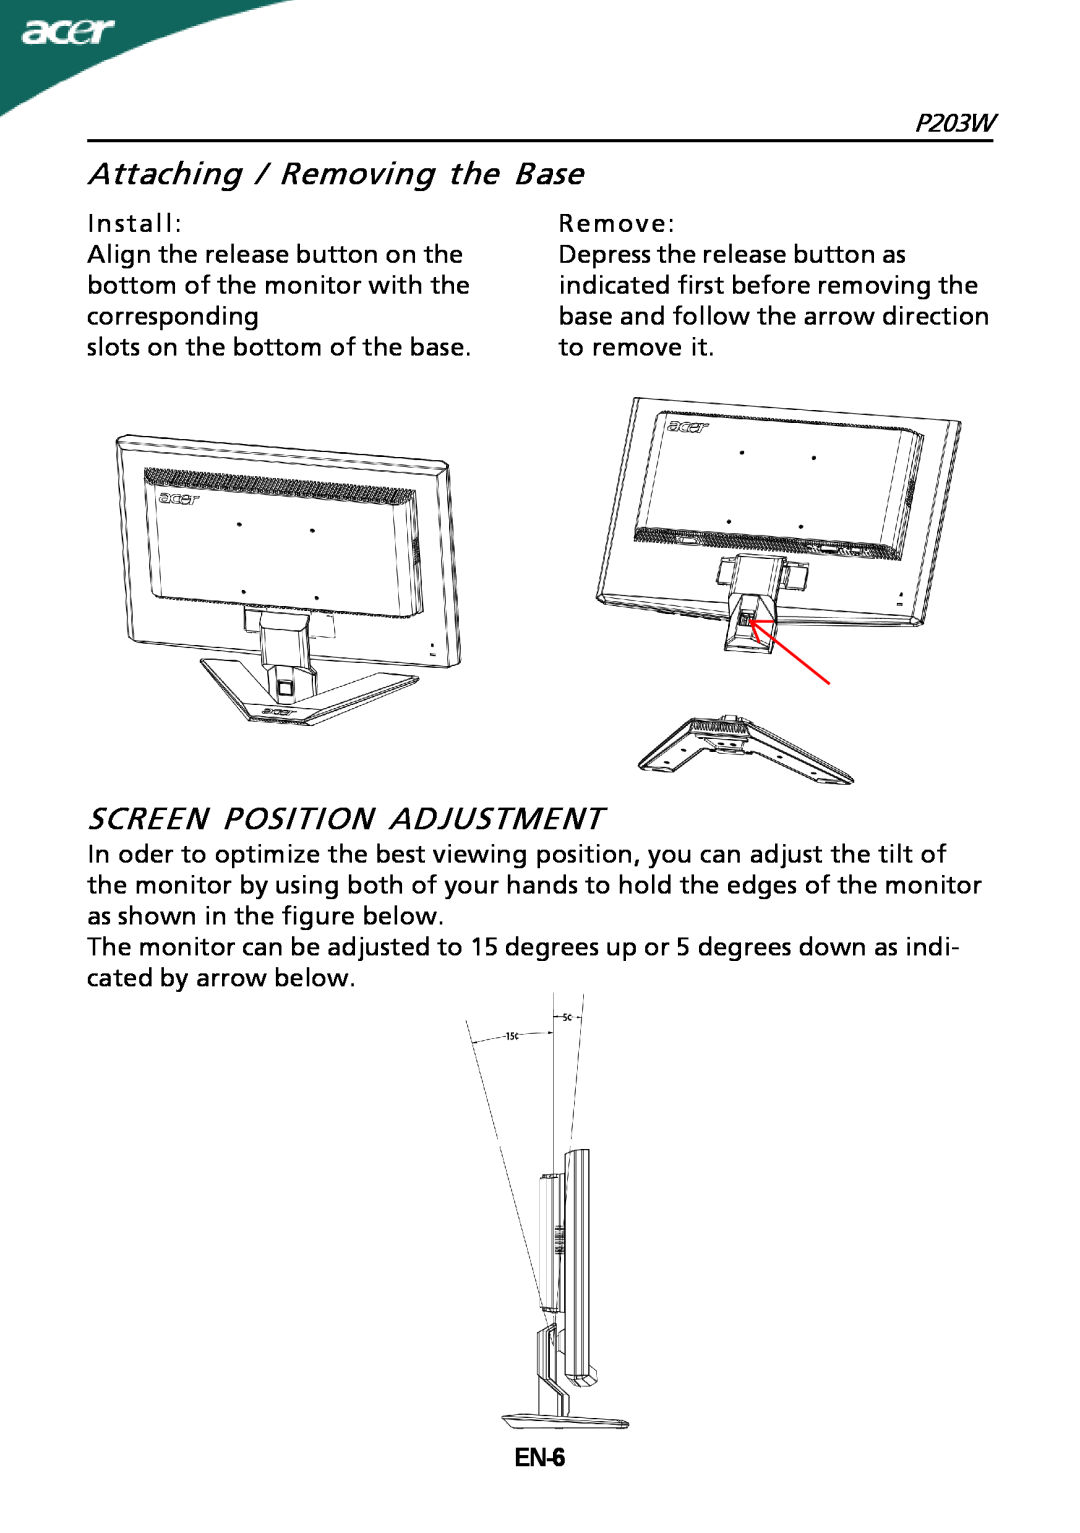 Acer P203W setup guide Attaching / Removing the Base, Screen Position Adjustment, EN-6 